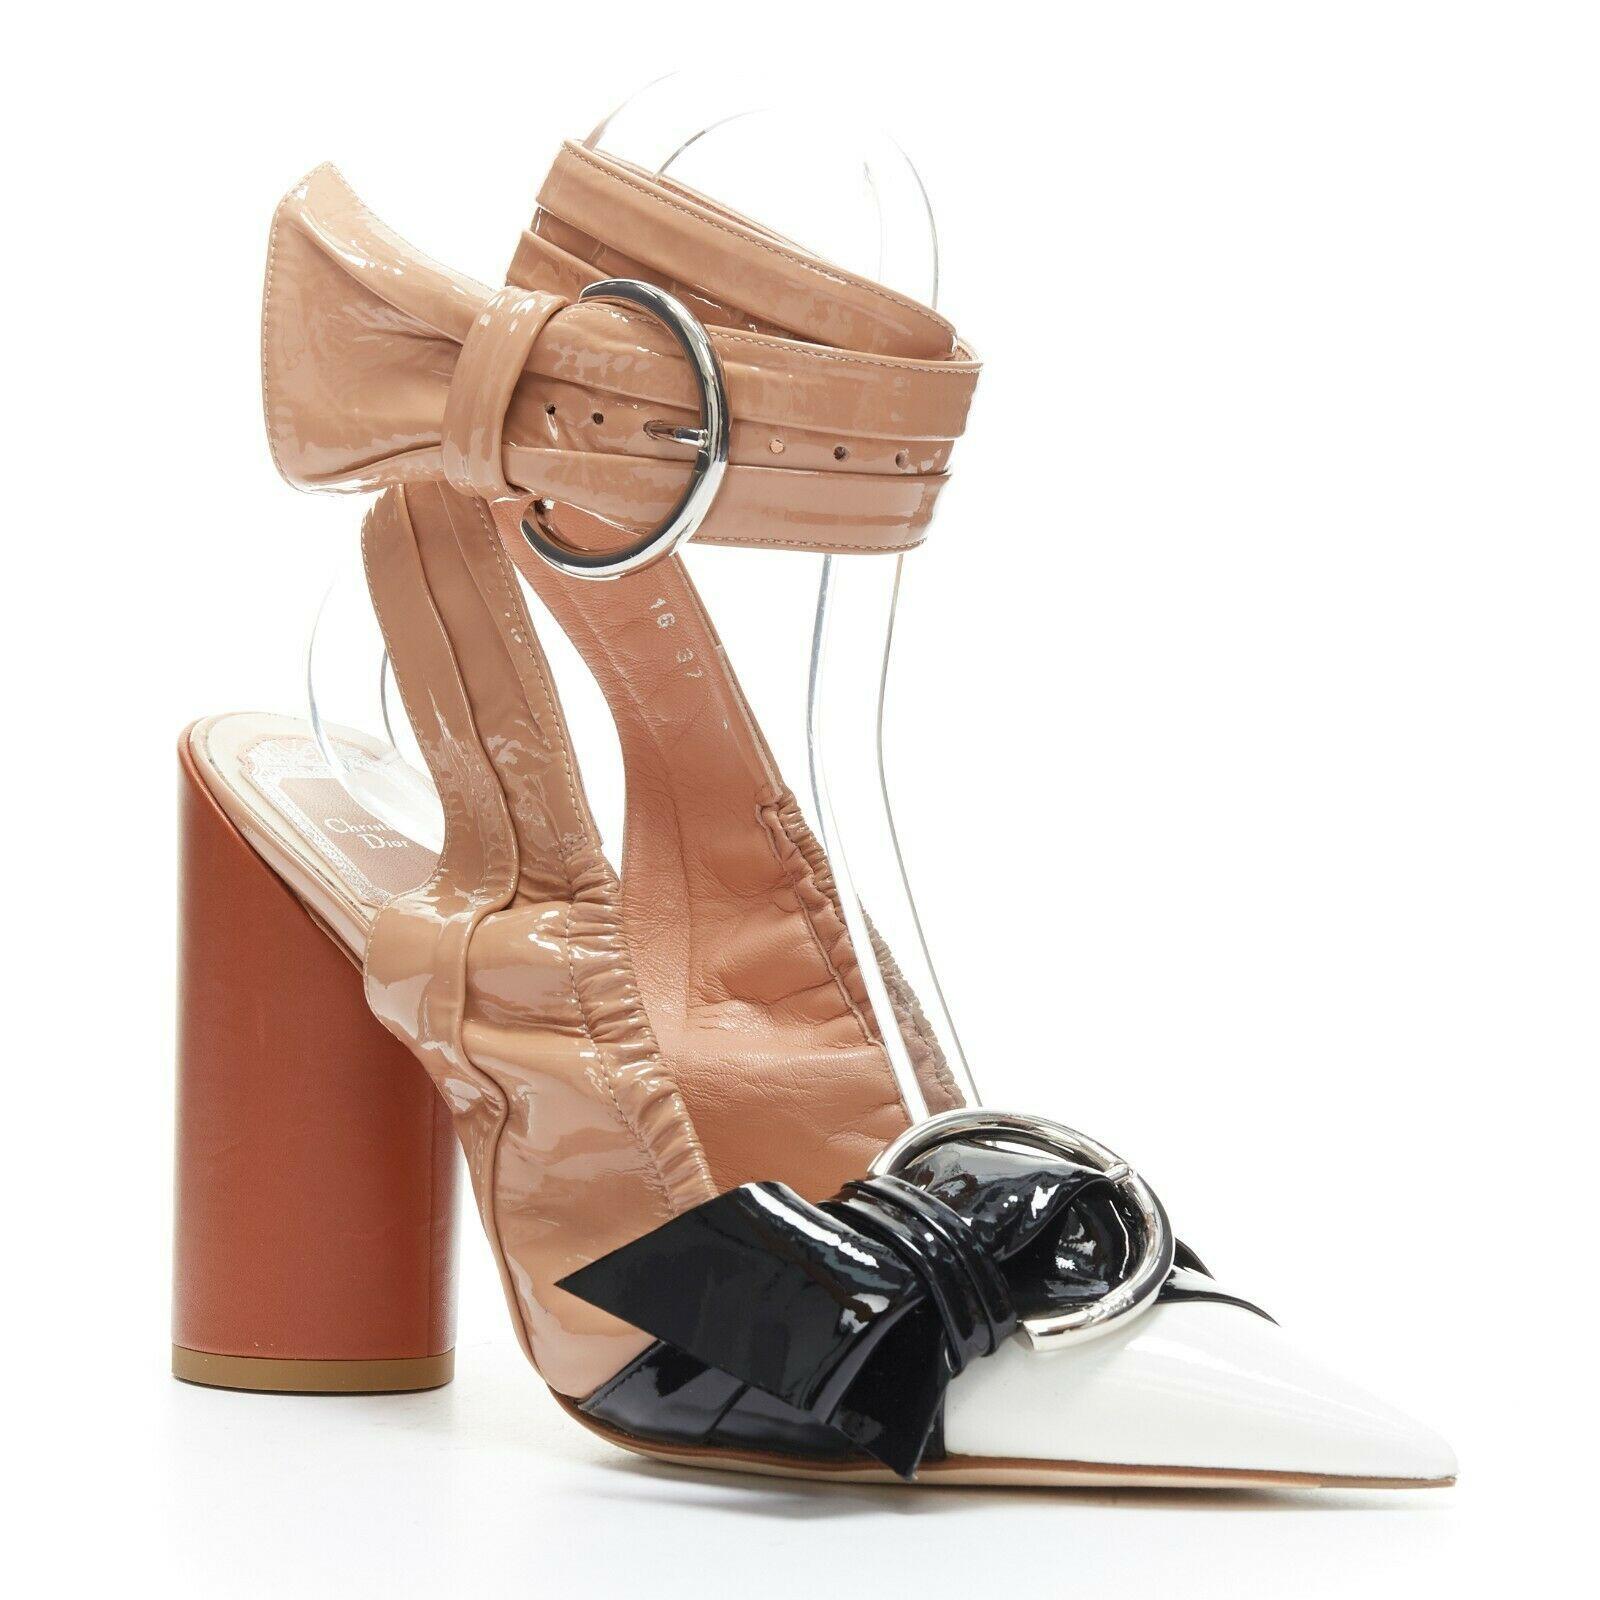 CHRISTIAN DIOR Conquest tri-toned patent buckle point toe cylinder heels EU37
CHRISTIAN DIOR BY RAF SIMONS
Dior Conquest. 
Triple toned patent leather. 
Nude, black and white. 
Silver buckle details. 
Brown cylinder heels. 
Leather insole and sole.